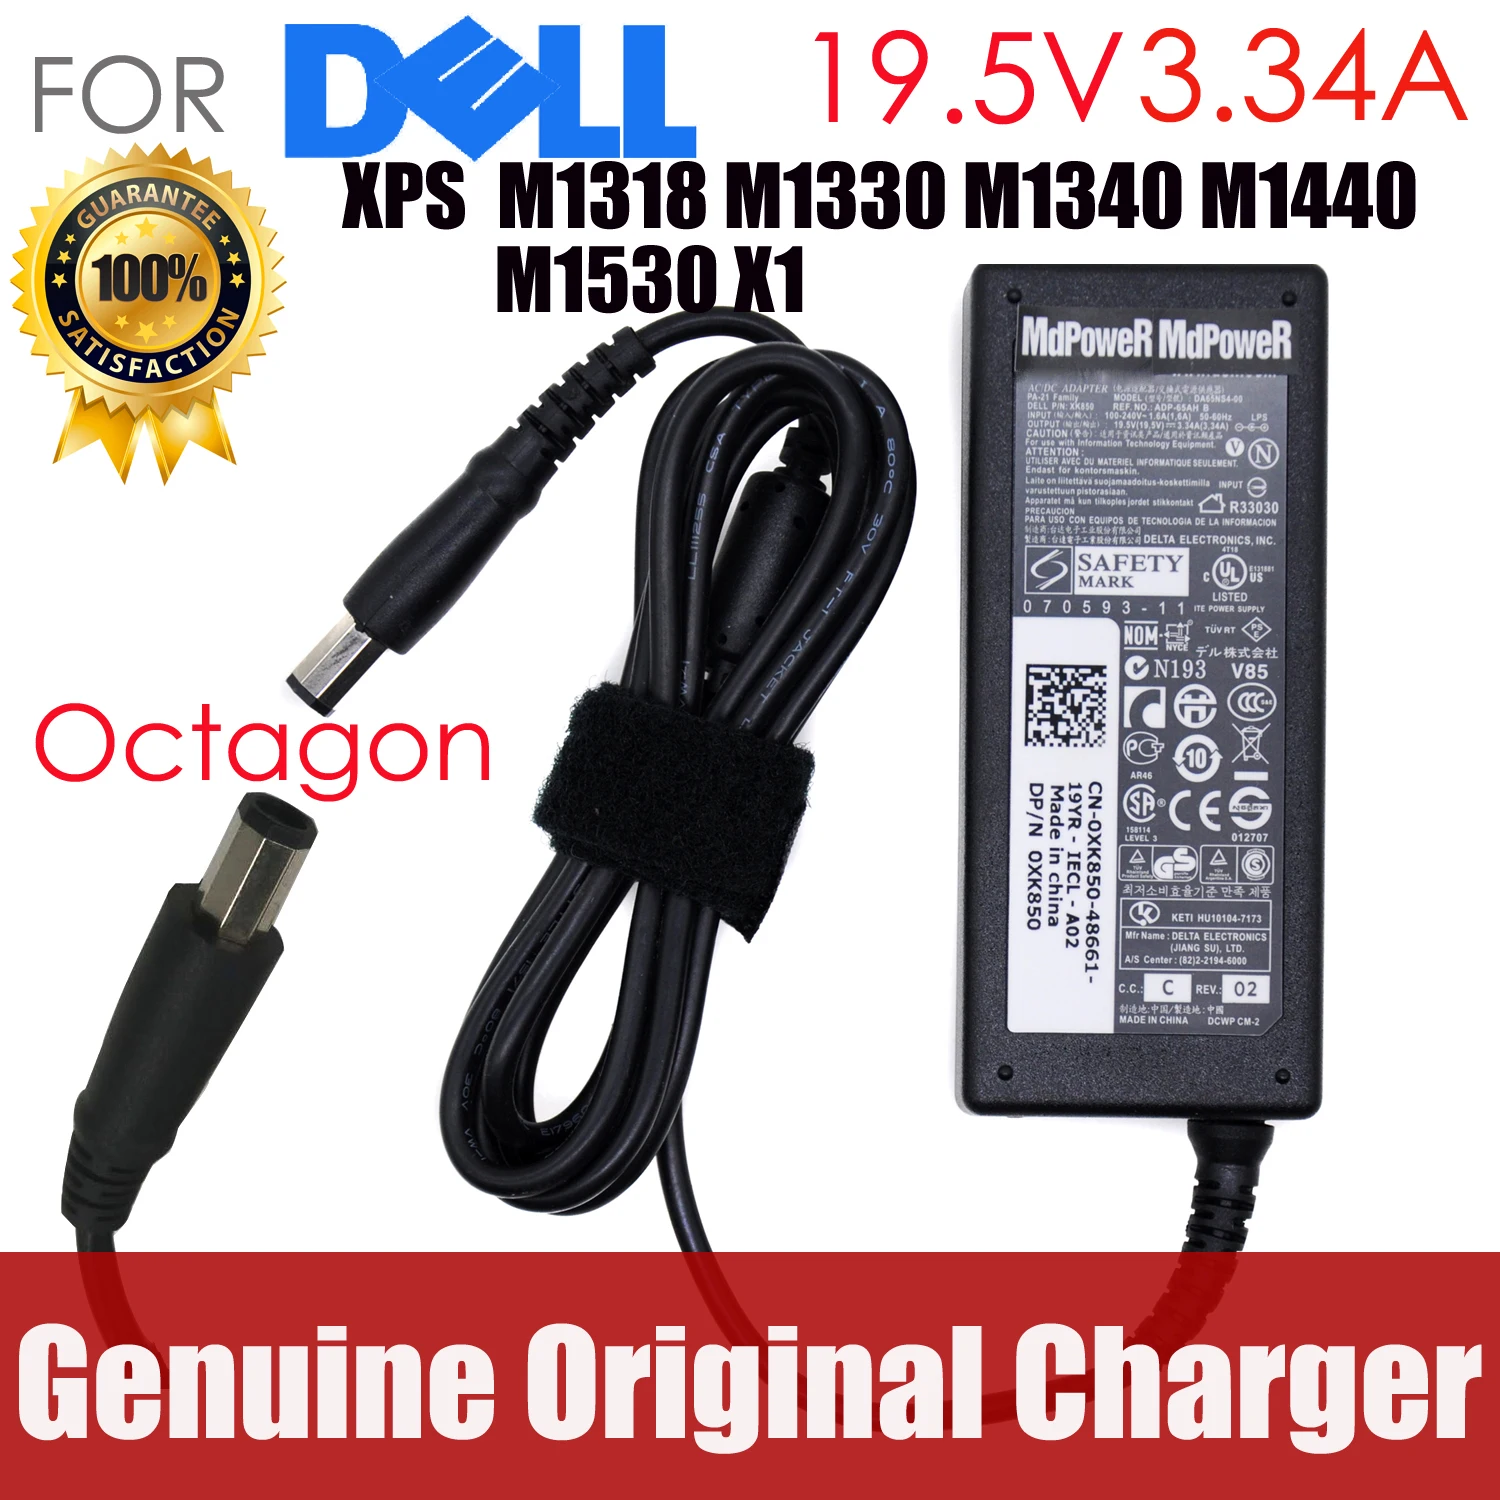 

Original 19.5V 3.34A Laptop AC Adapter for Dell XPS 1330 1340 1440 M1318 M1330 M1340 M1440 M1530 X1 charger